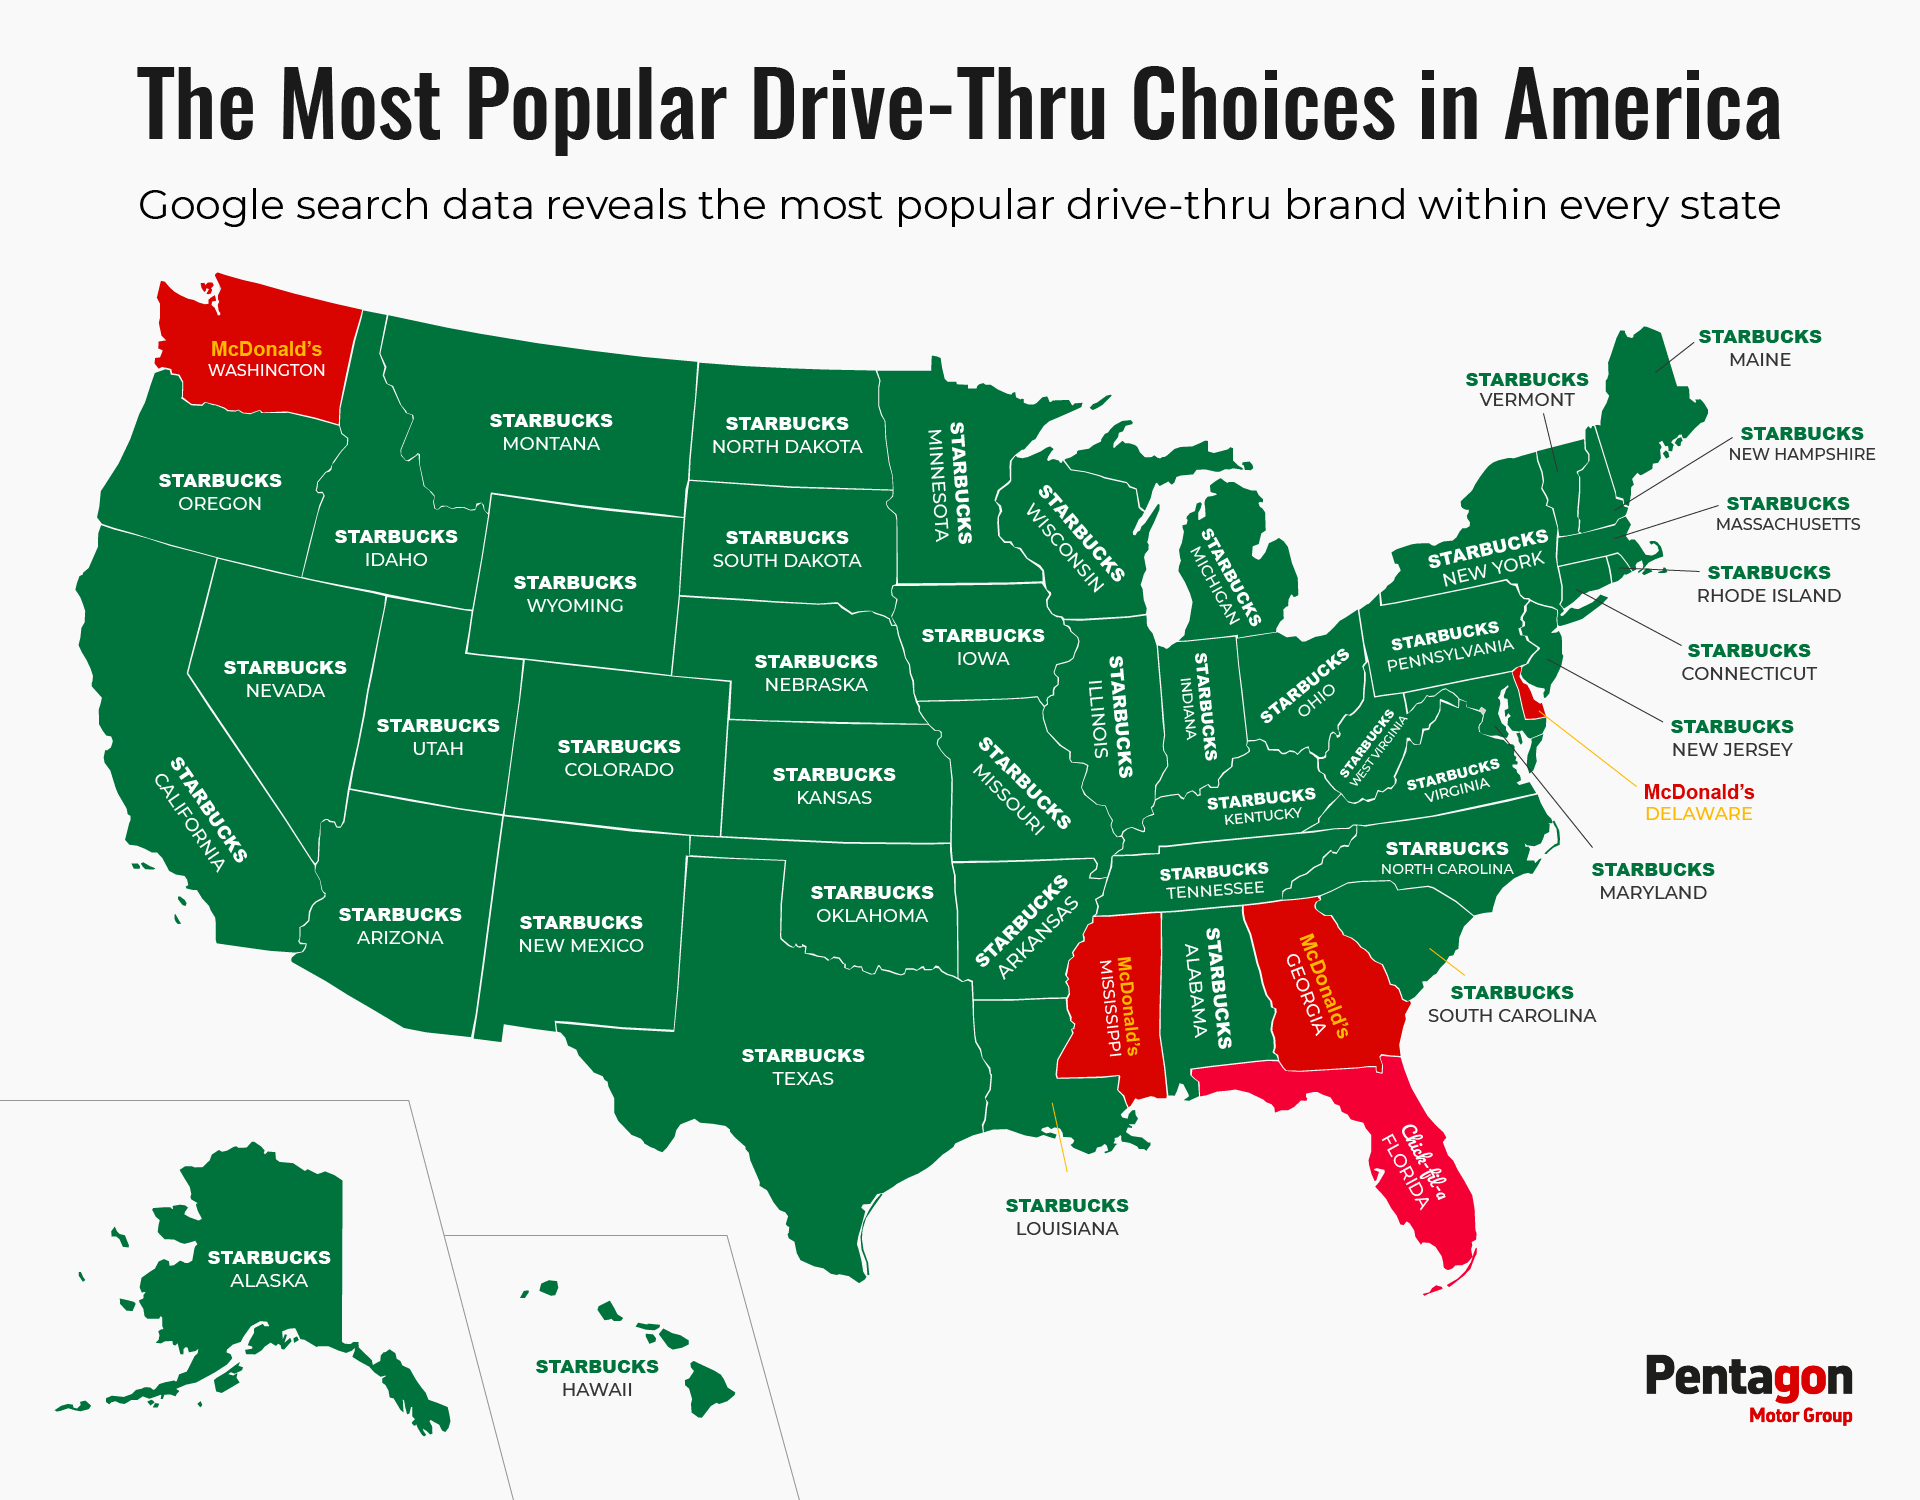 Most Popular Drive-Thrus in the USA